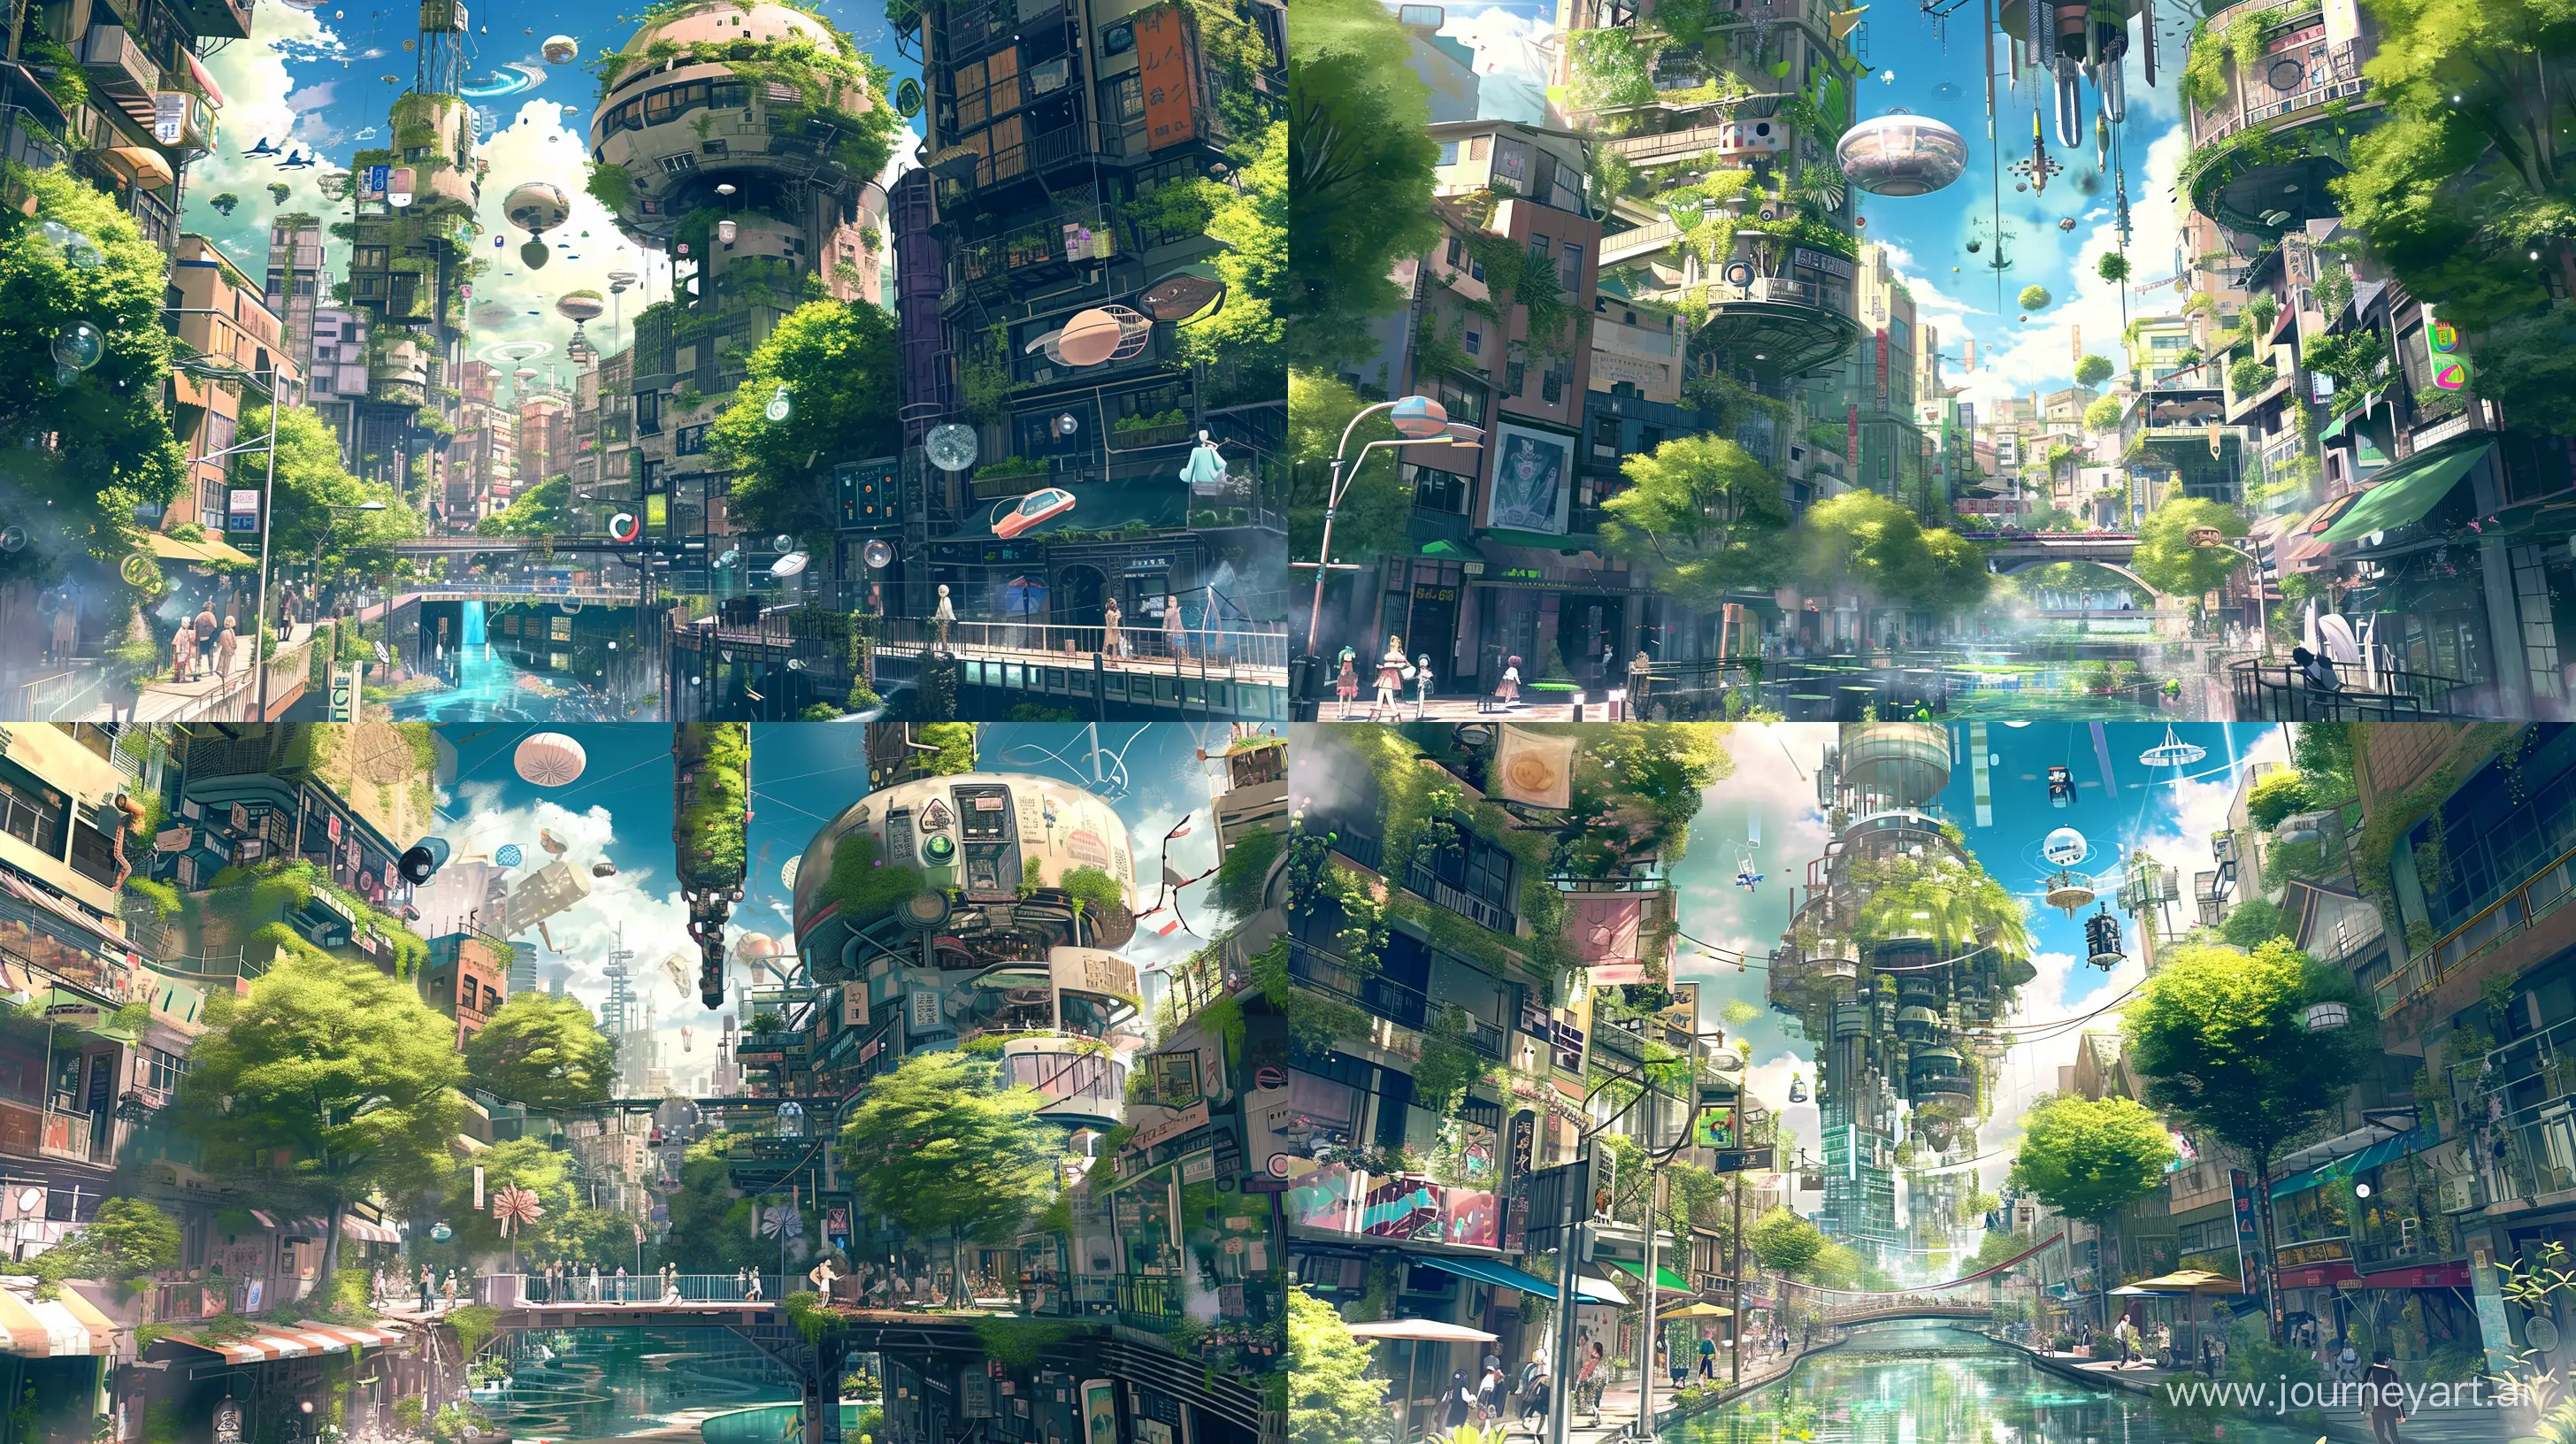 Fantastical-Anime-Cityscape-with-Floating-Objects-and-Lush-Greenery